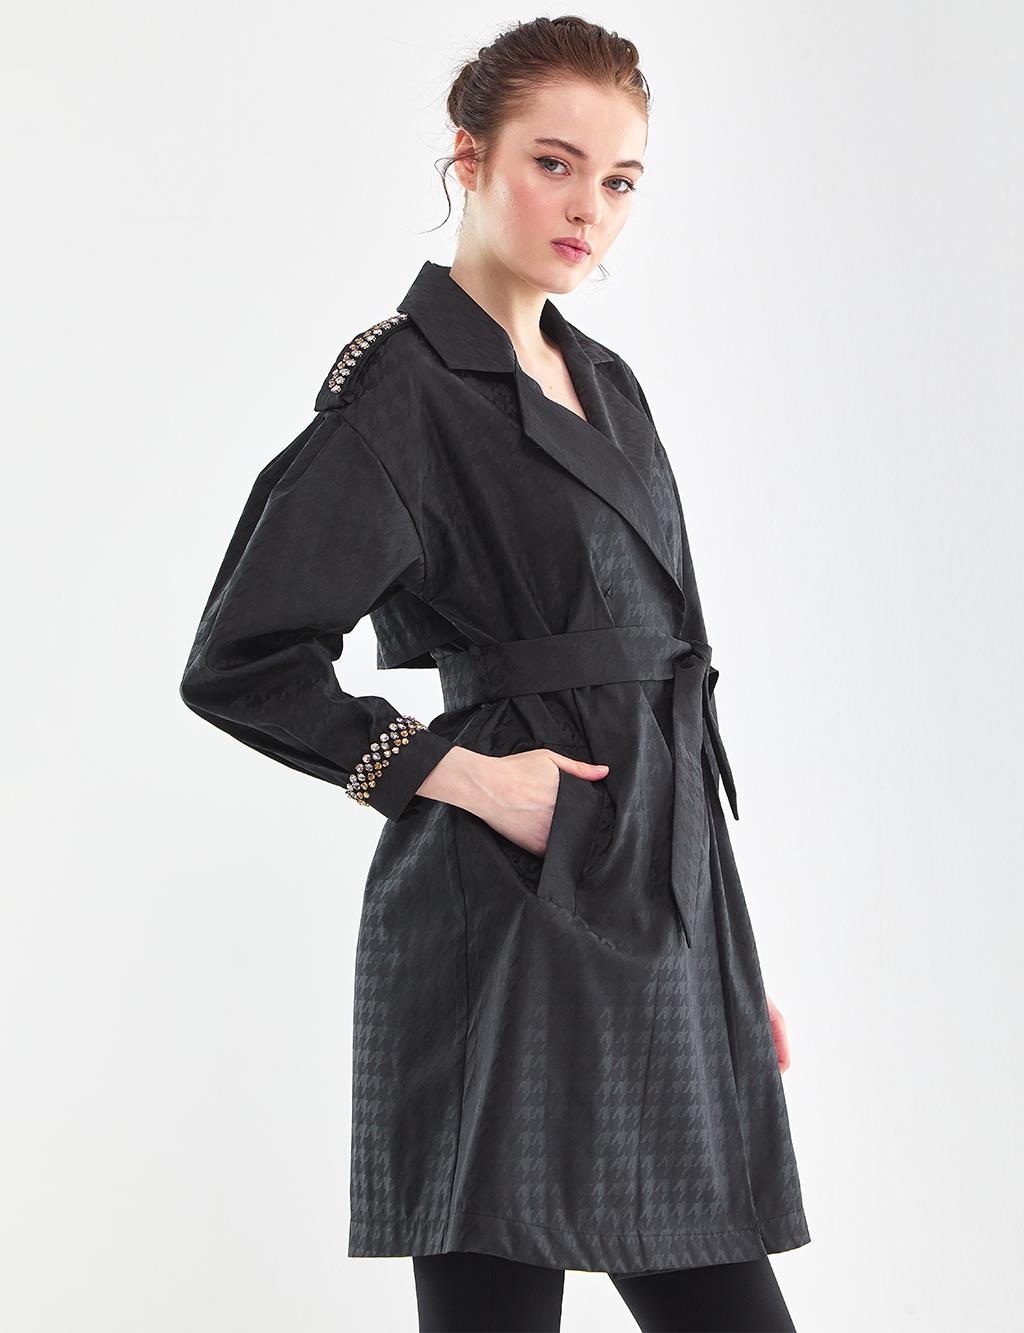 Houndstooth Patterned Trench Coat Black